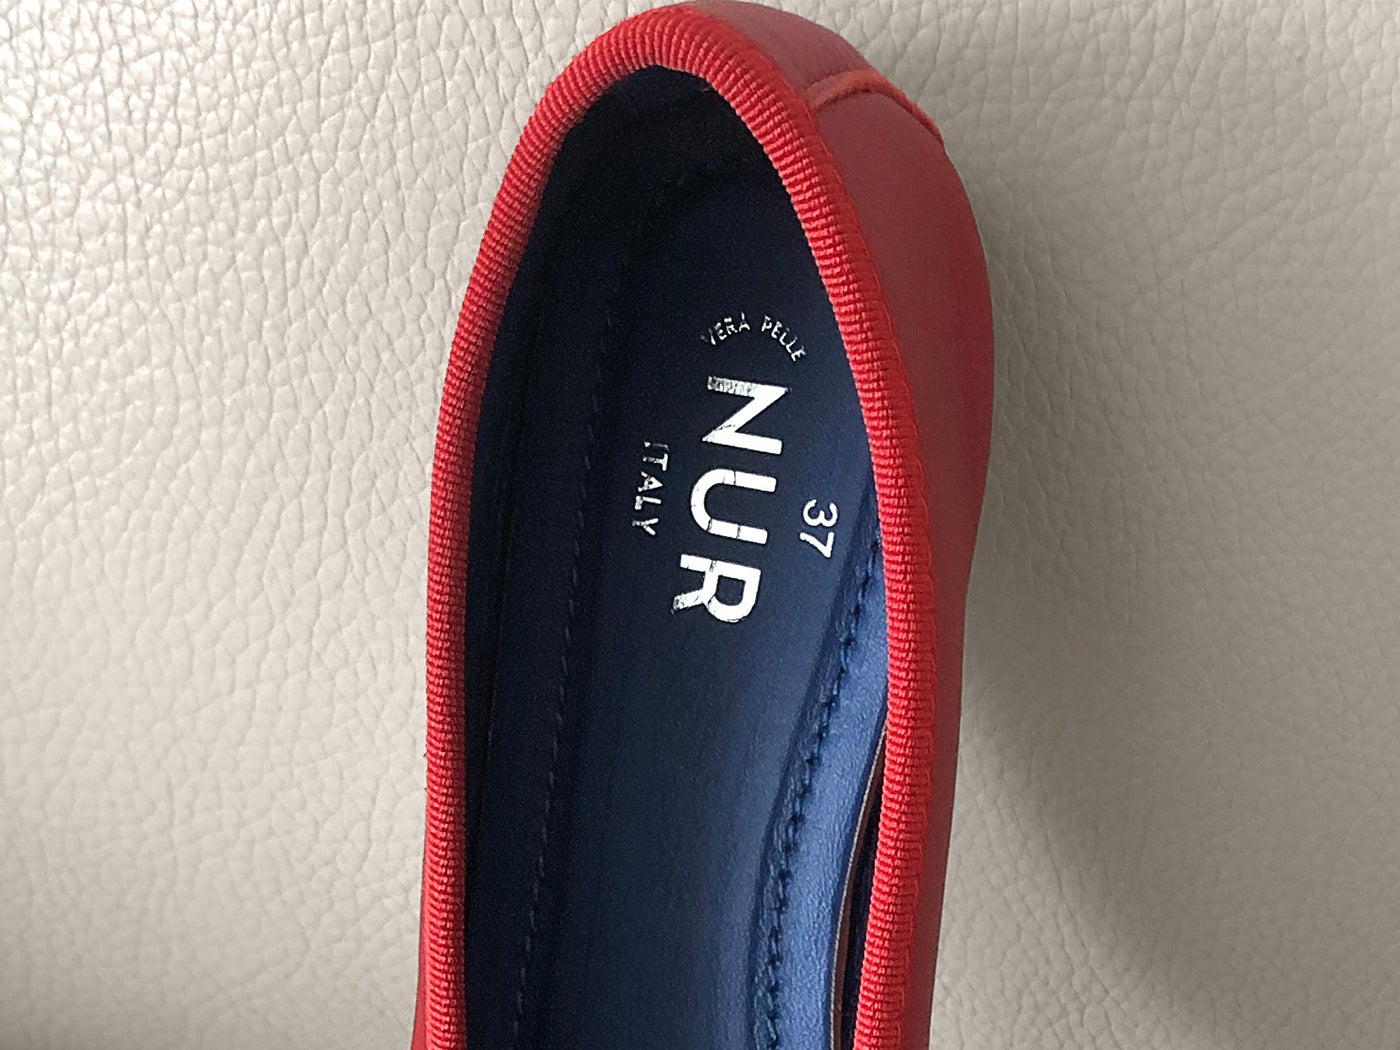 NUR ITALY Presents: A Guide to Perfectly Fitting European Shoes